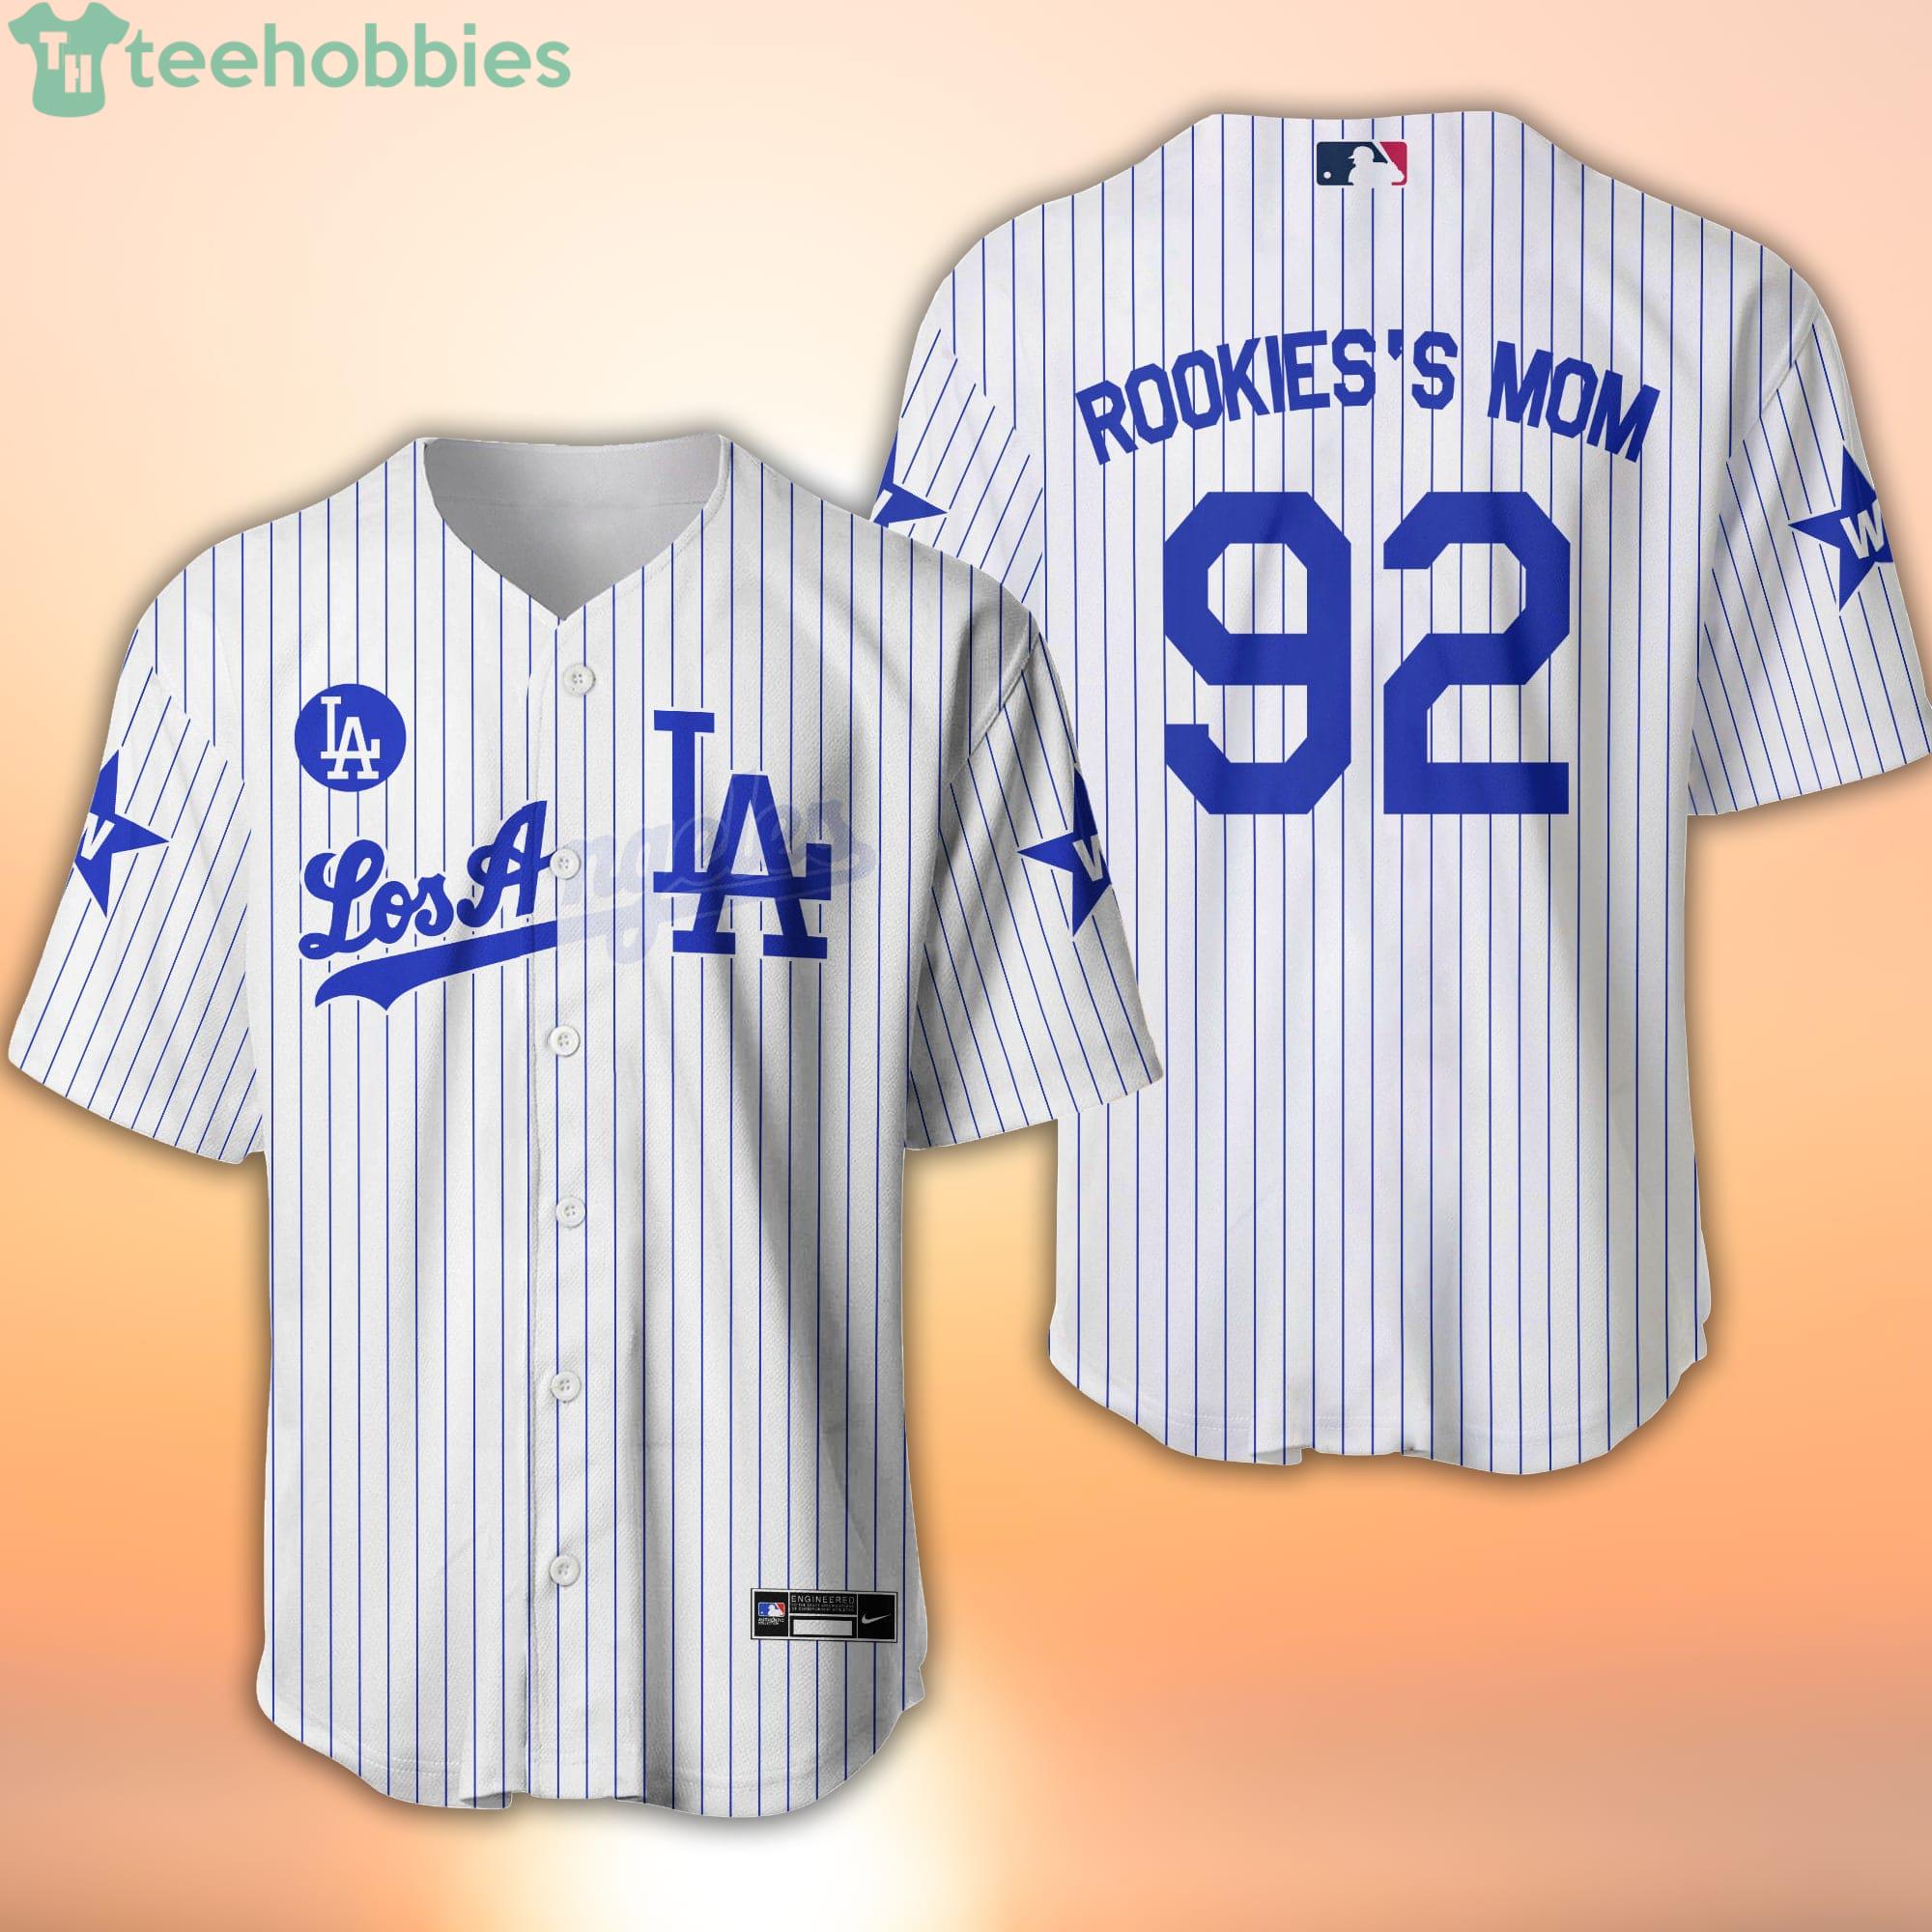 Los Angeles Dodgers Royal Blue Baseball Jersey Full Button 